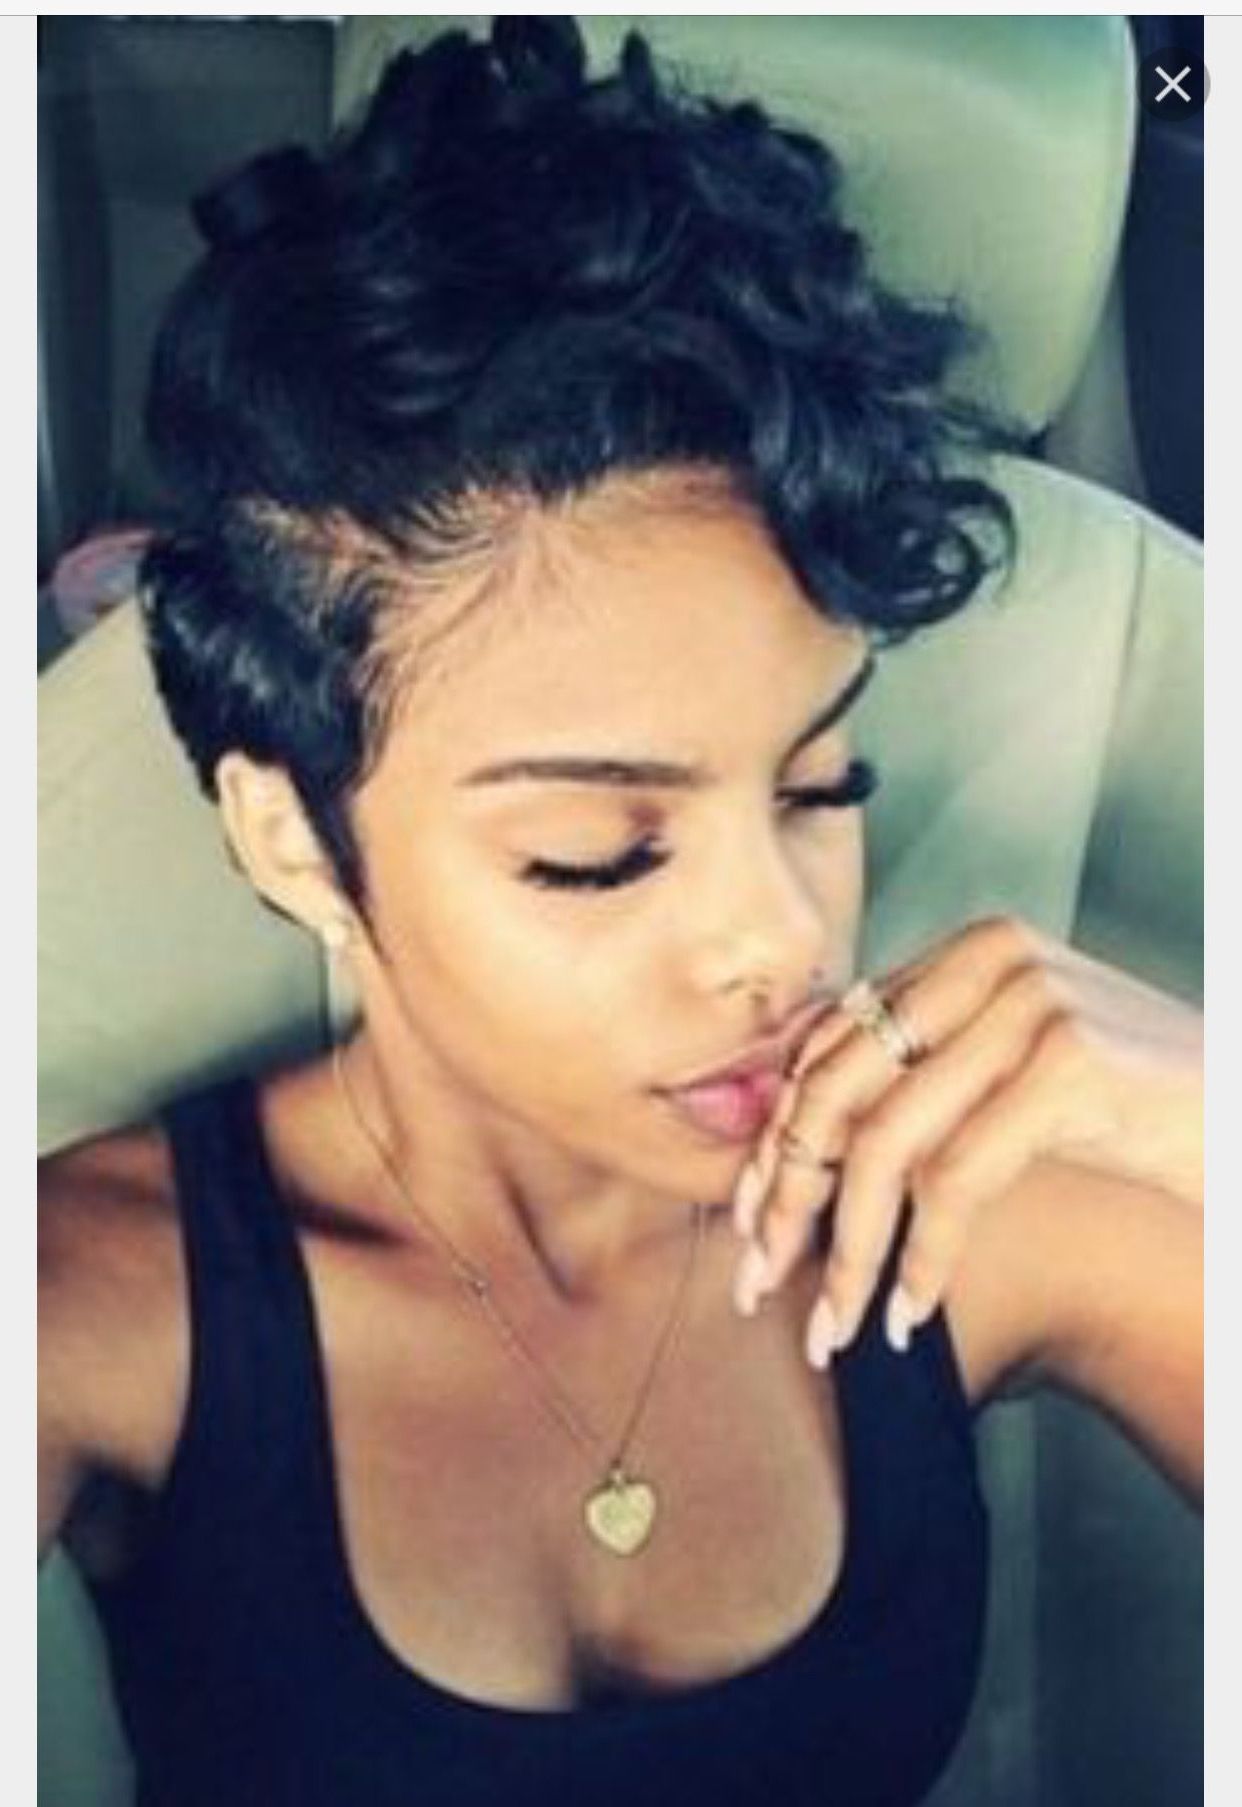 Pindamicka Mcclain On Hair Slayyyed | Pinterest In Sexy Short Haircuts For Black Women (View 25 of 25)